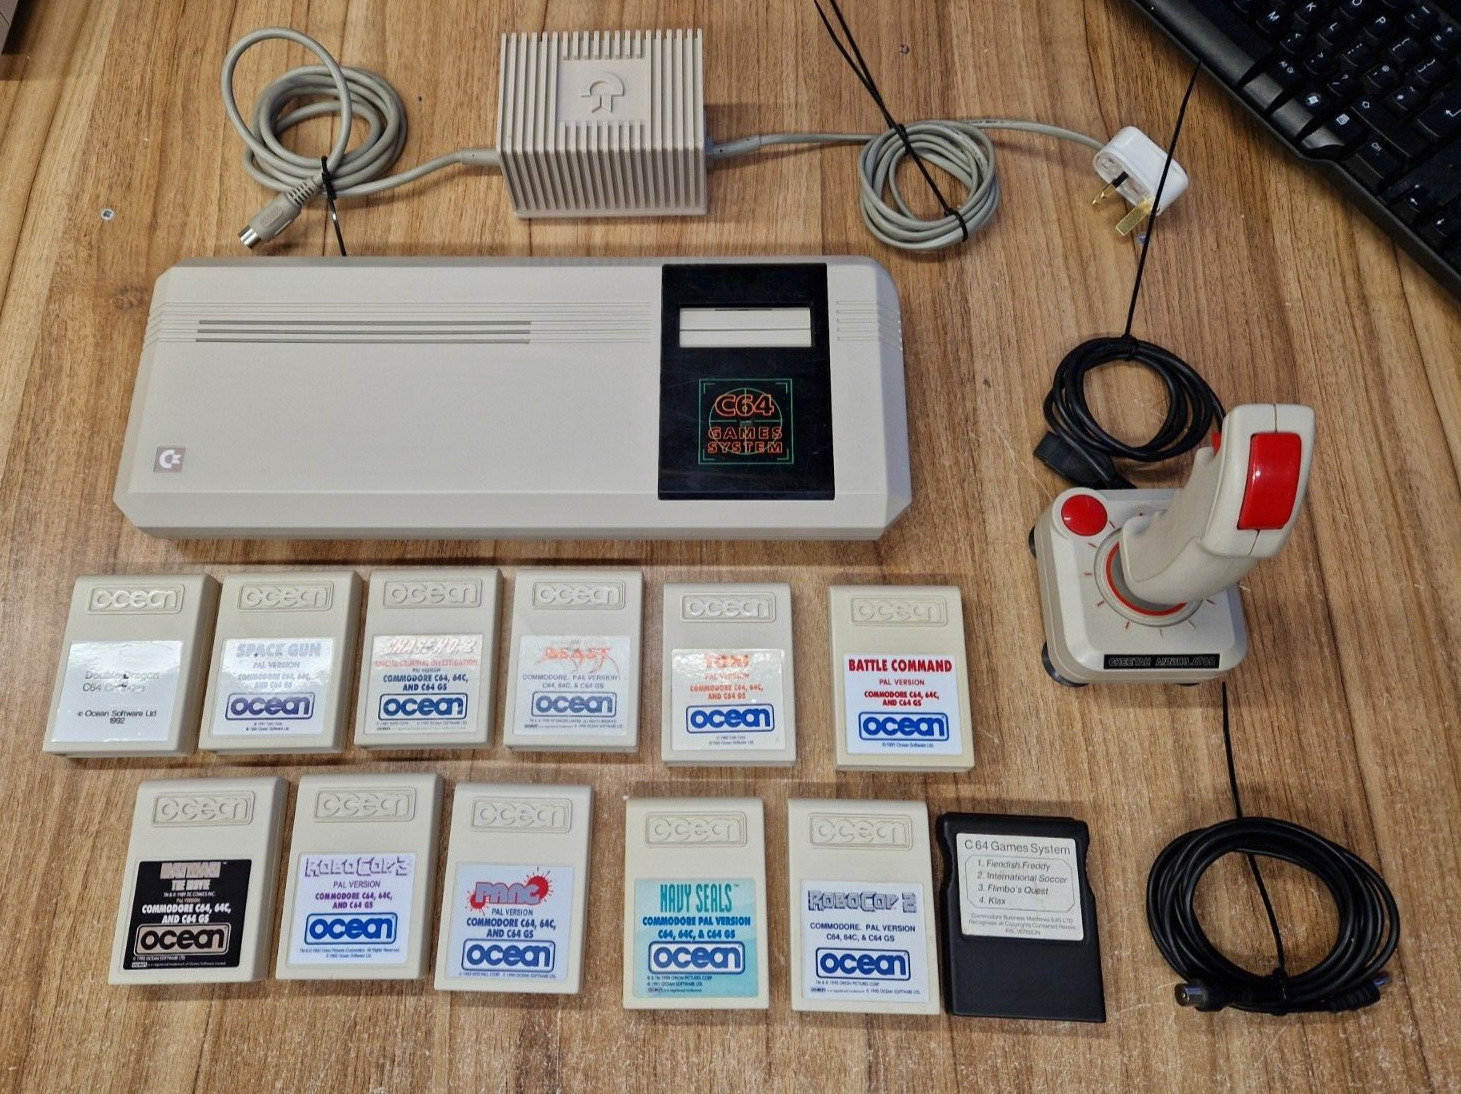 Ultra Rare Commodore 64GS with 12 Game Cartridges Tested